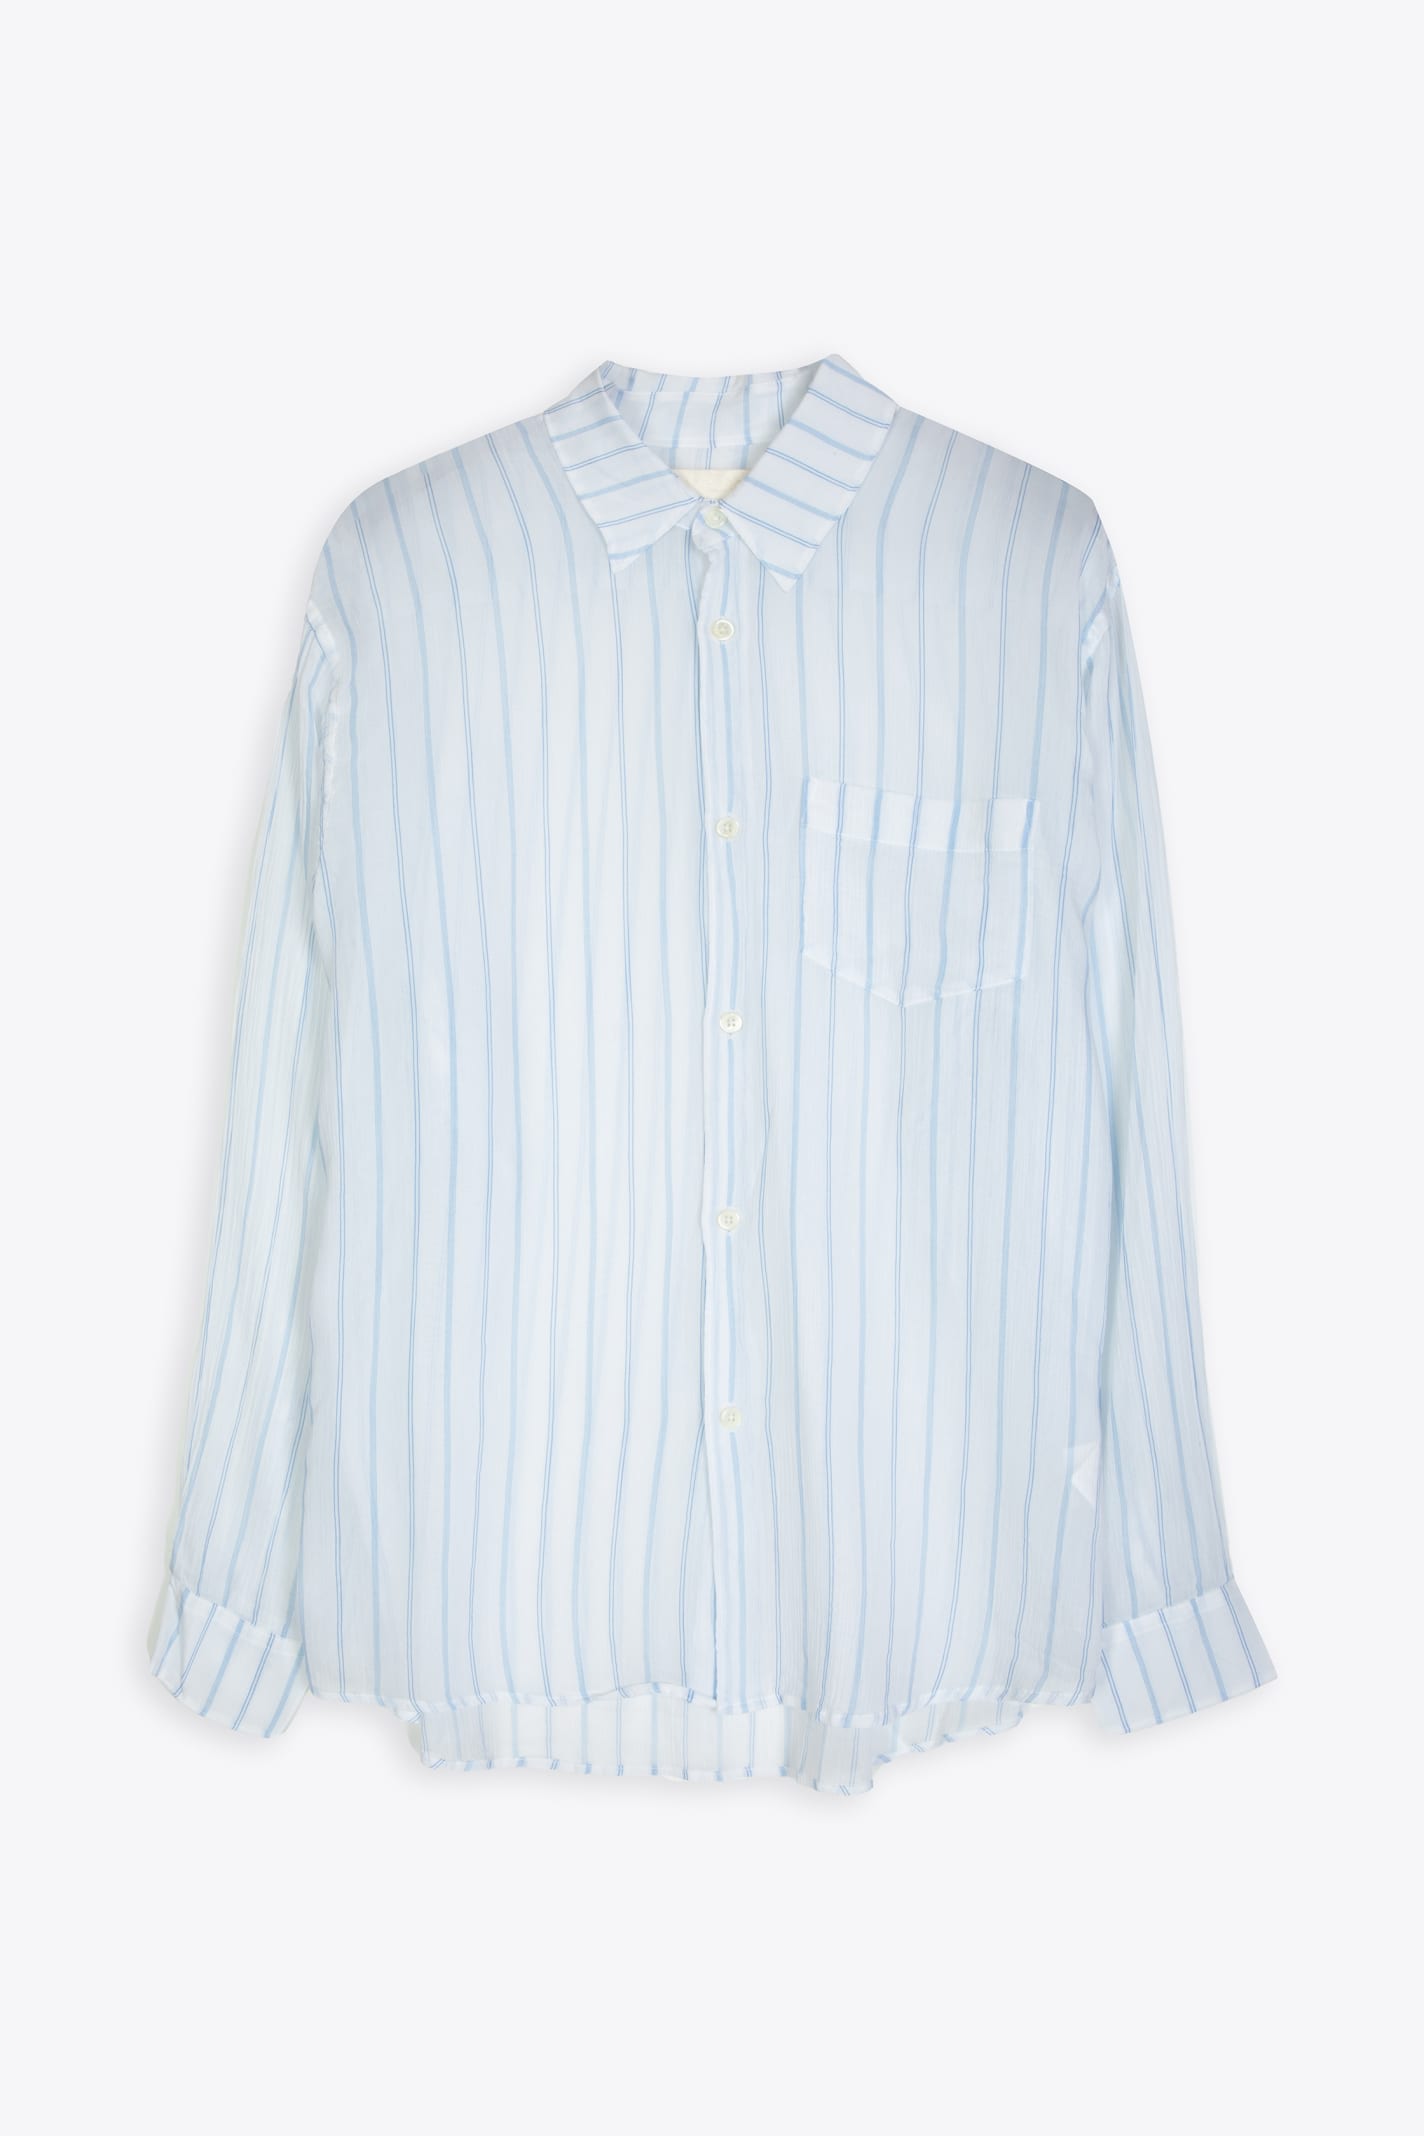 OUR LEGACY INITIAL SHIRT WHITE PLEATED COTTON SHIRT WITH STRIPES - INITIAL SHIRT